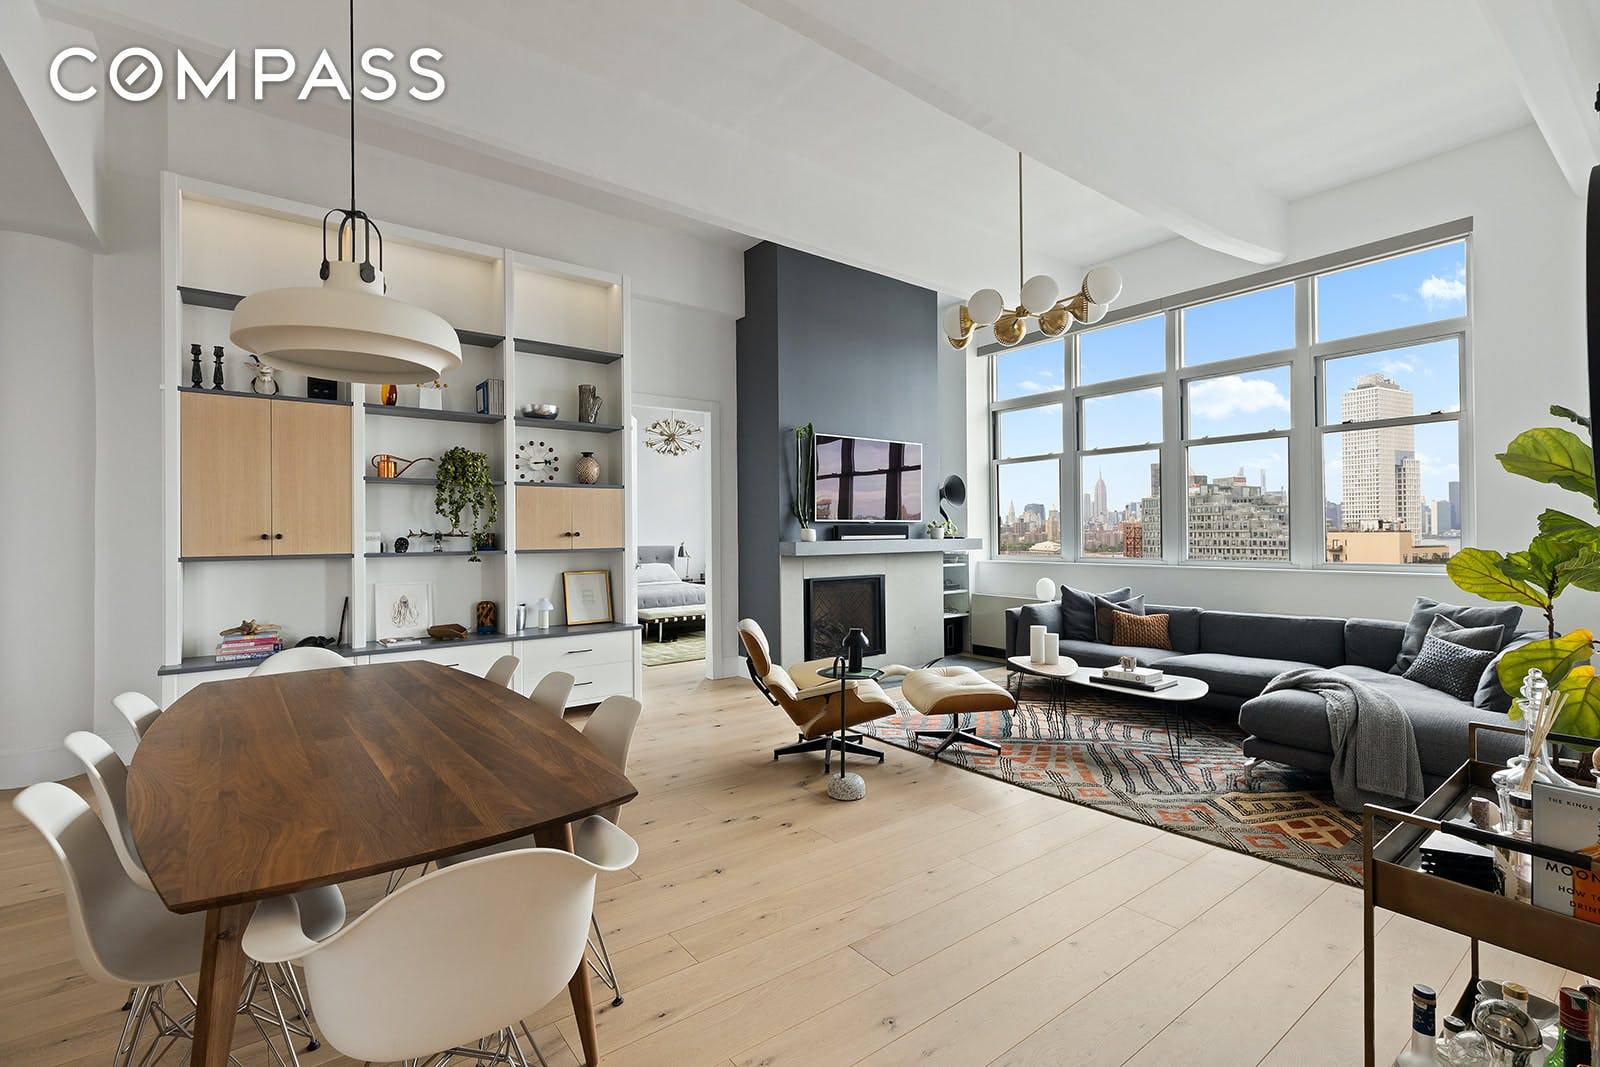 Enjoy true loft living in this chic, impeccably renovated 3 bedroom 2.